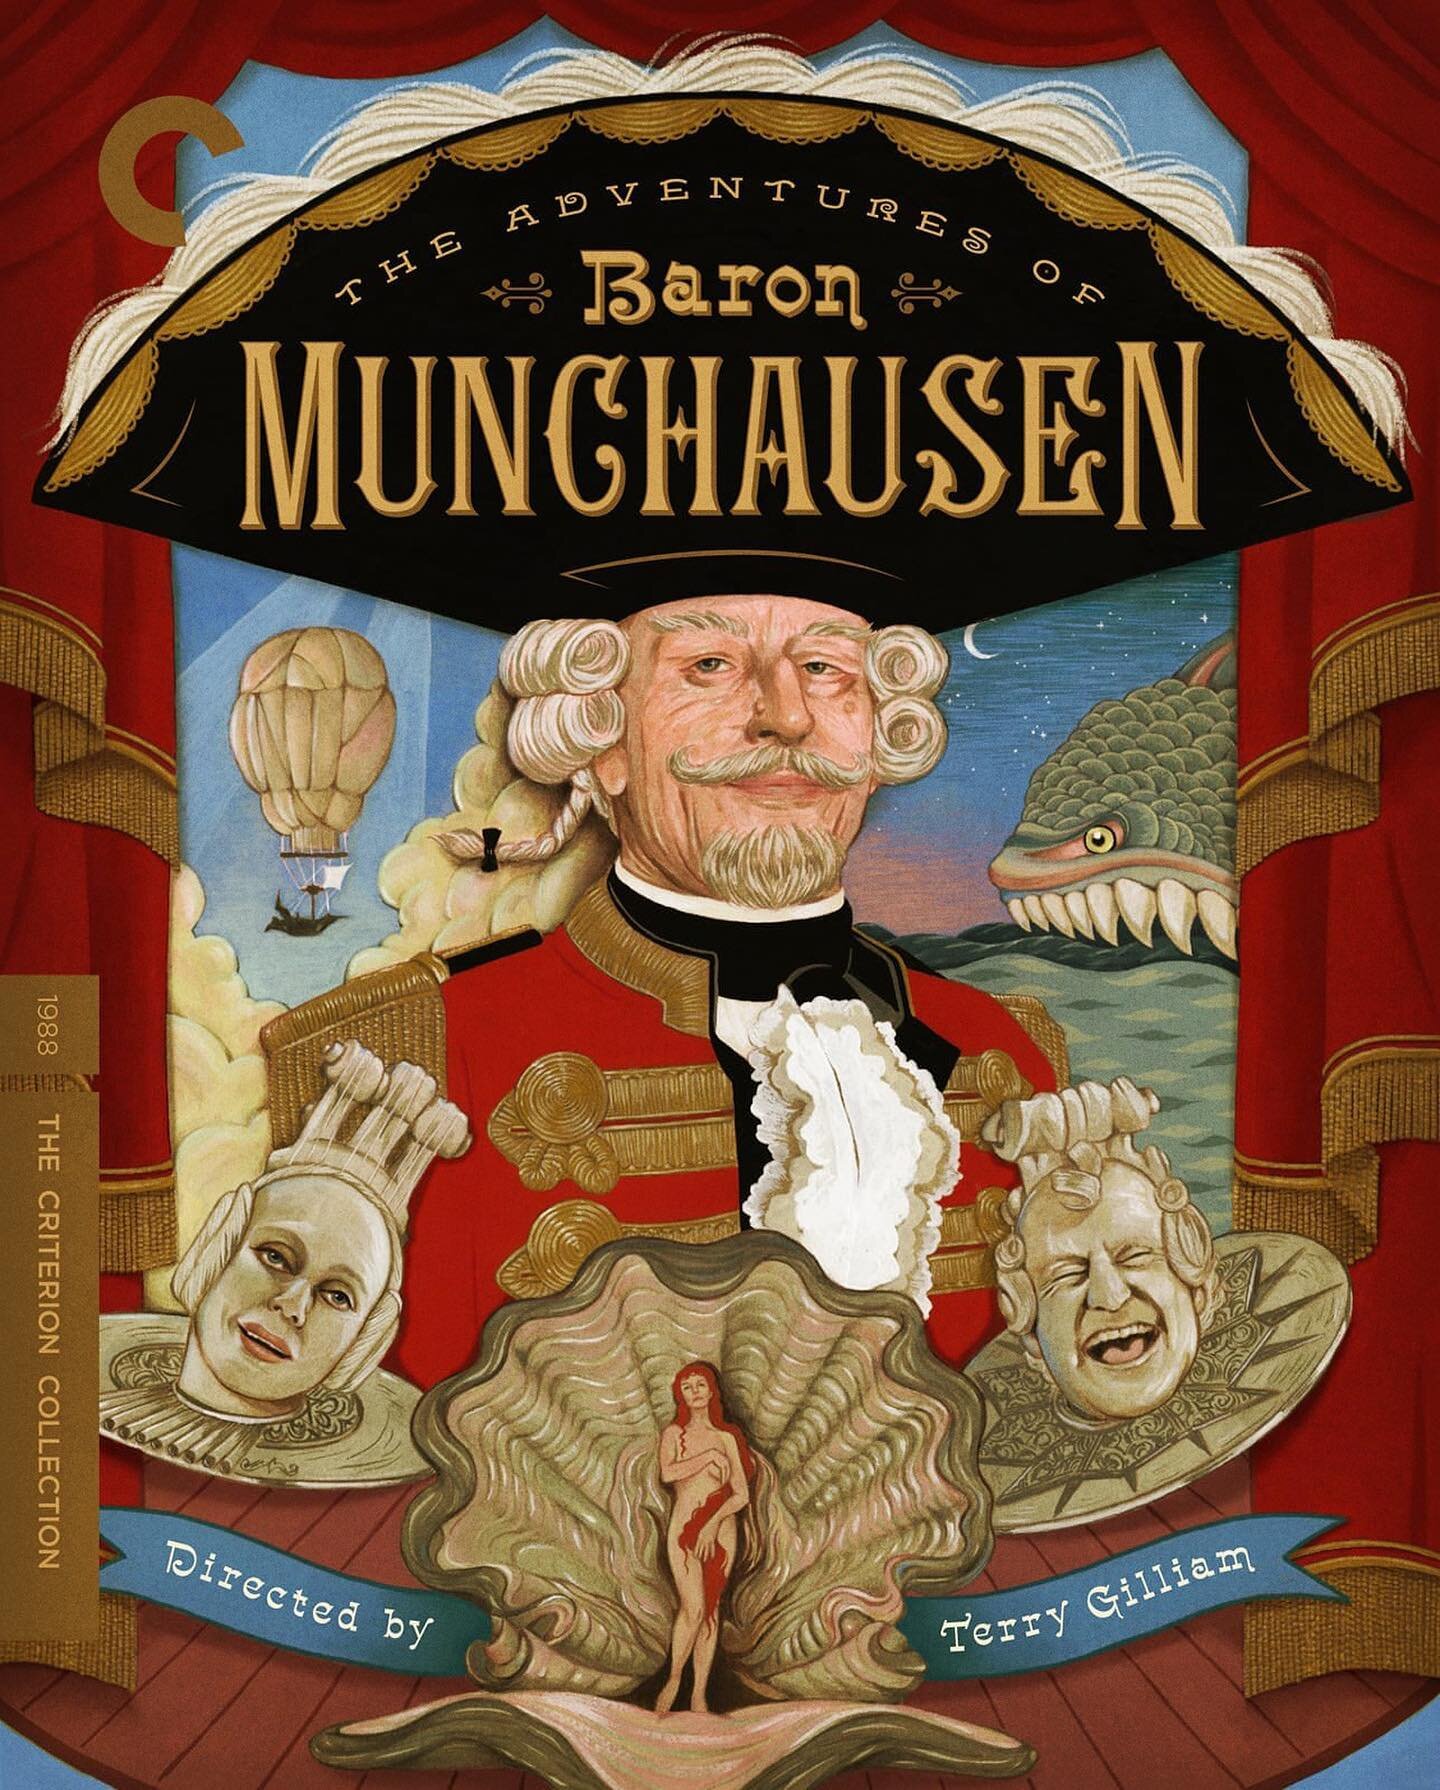 @CriterionCollection has announced their January 2023 titles and I *loved* creating some outrageous typography for the cover of Terry Gilliam&rsquo;s dazzling fantasy &ldquo;The Adventures of Baron Munchausen.&rdquo;

🎨by the incredible @abby_giusep